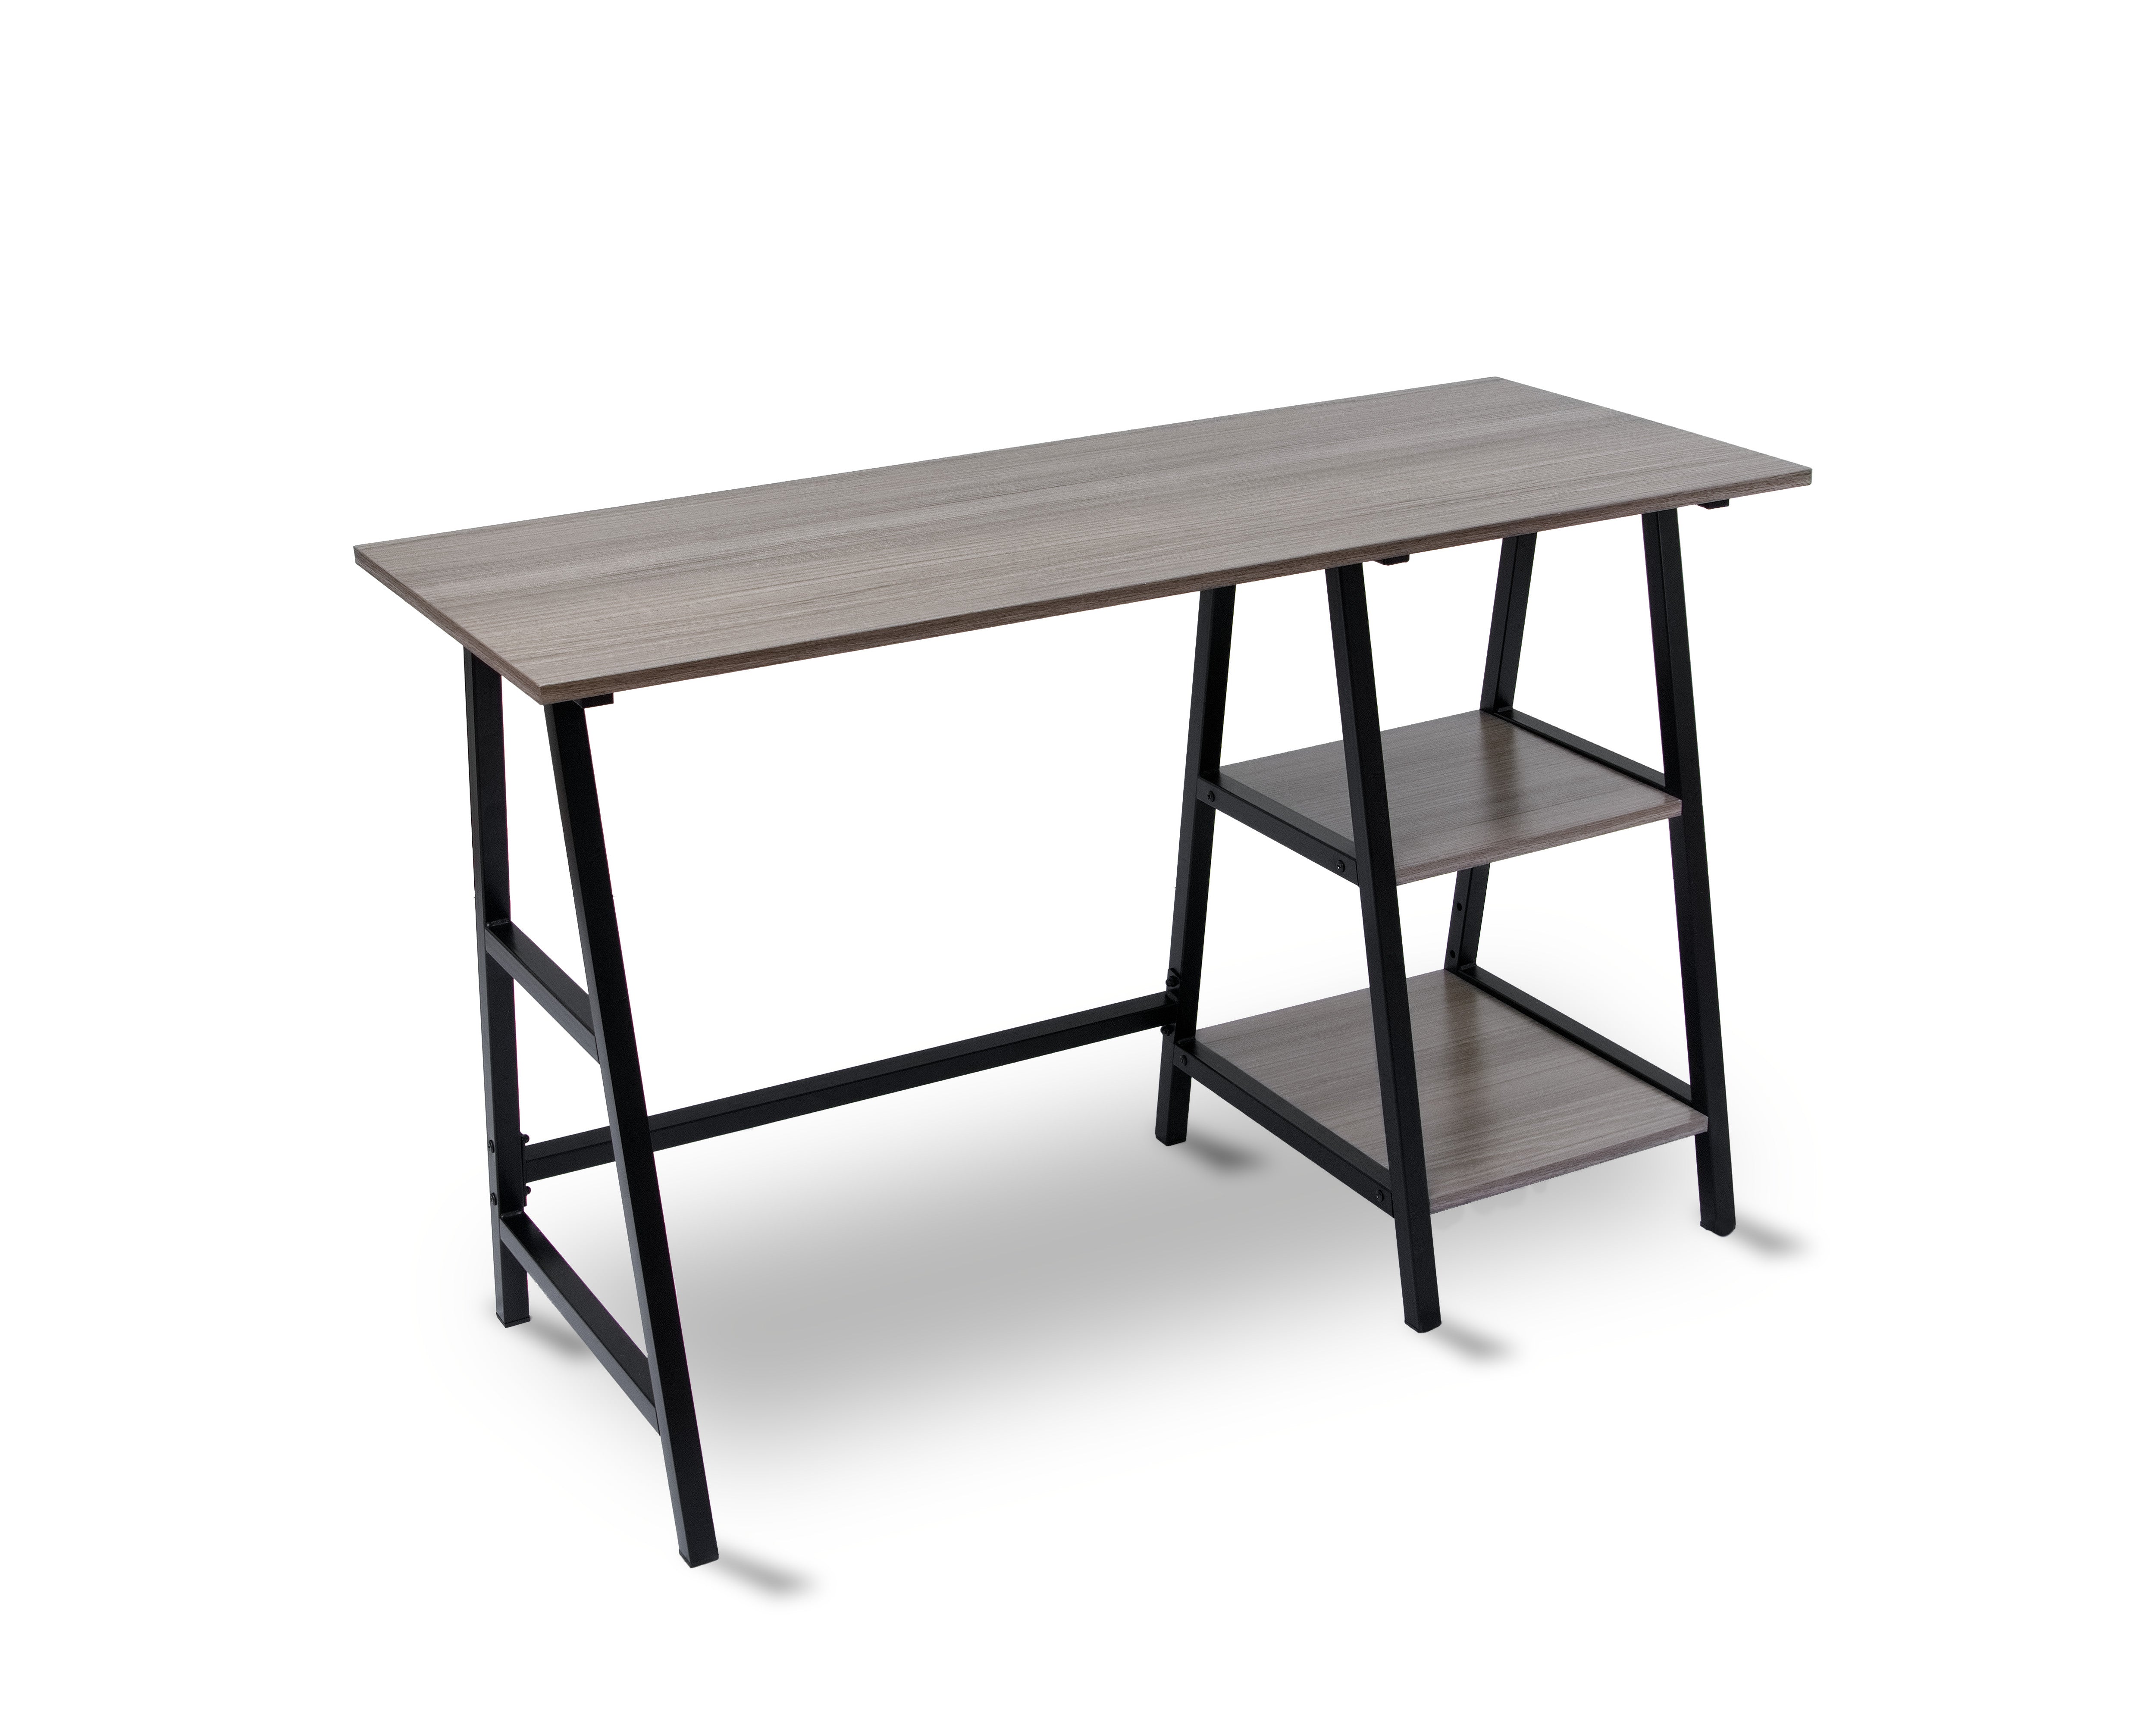 ZfLogic OFFICE SPACE Home Office Table Computer Desk with 2 Shelves (Smoke grey)